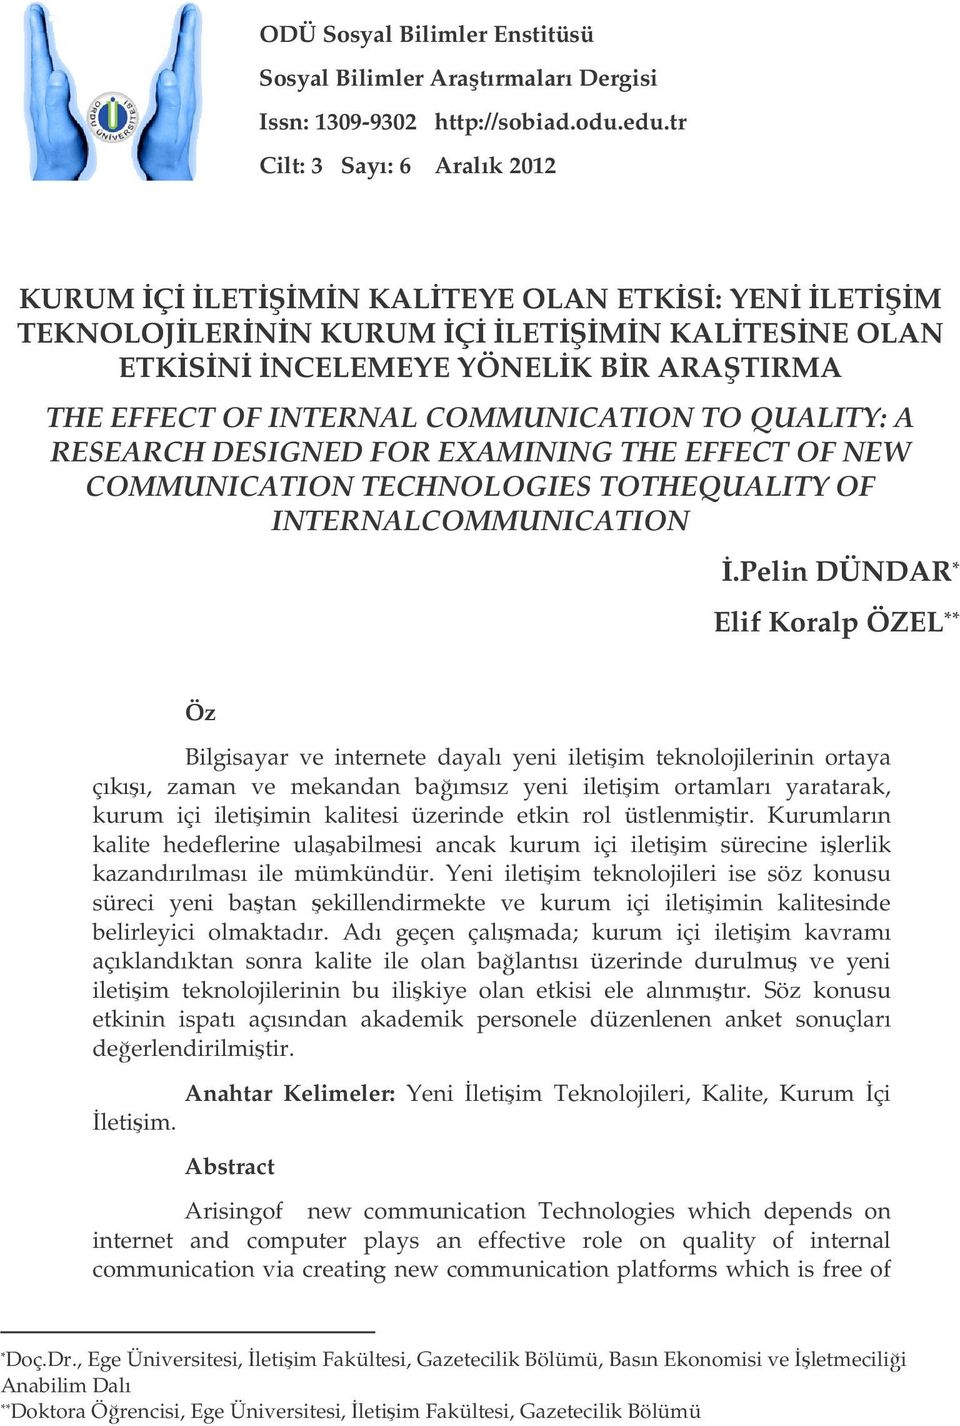 A RESEARCH DESIGNED FOR EXAMINING THE EFFECT OF NEW COMMUNICATION TECHNOLOGIES TOTHEQUALITY OF INTERNALCOMMUNICATION.